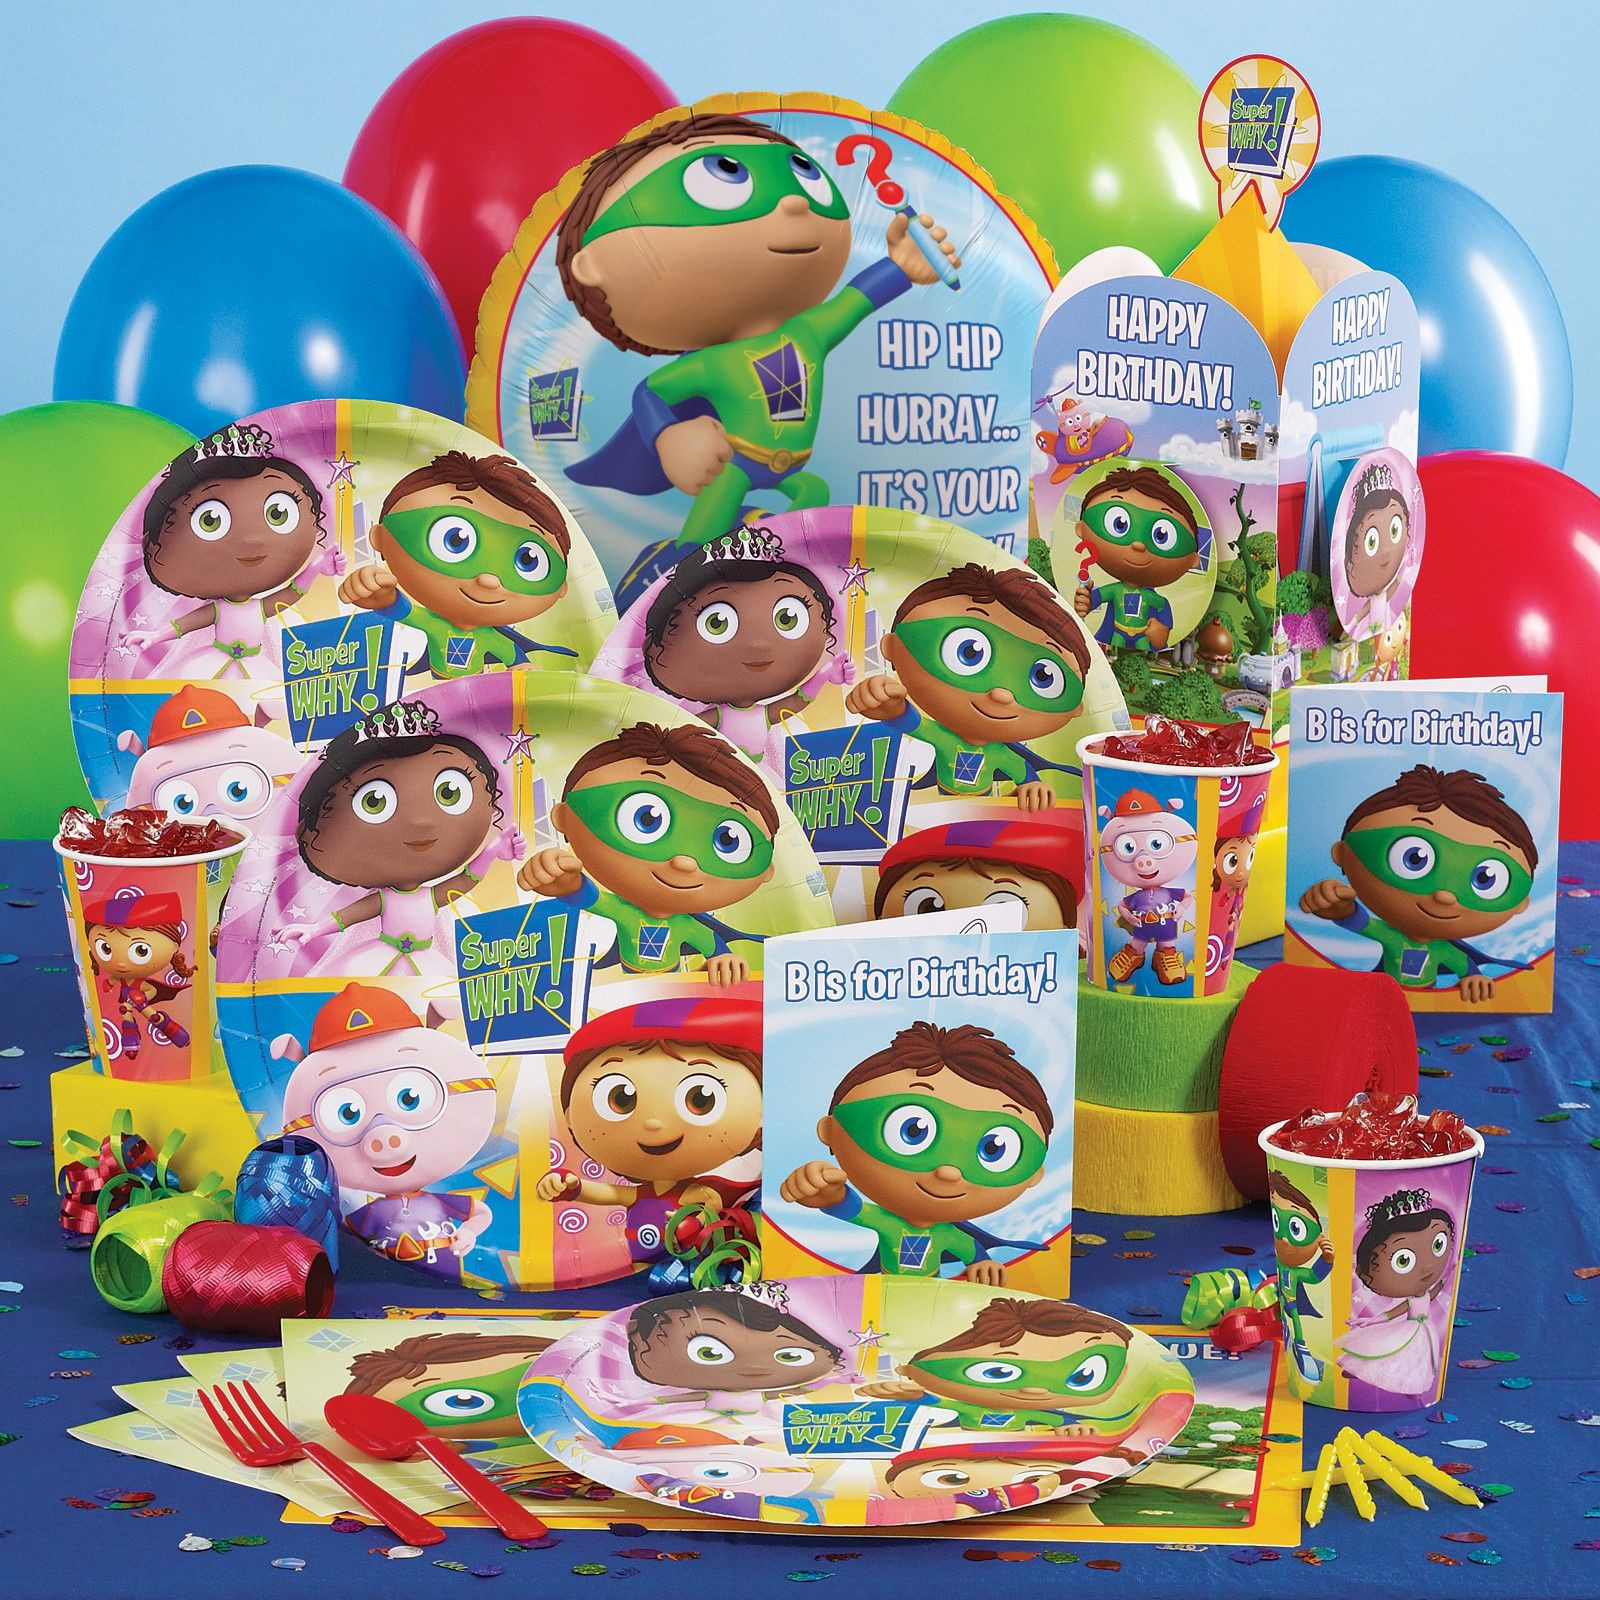 Super Why Birthday Decorations
 looks like it s goin to be a super why birthday party this